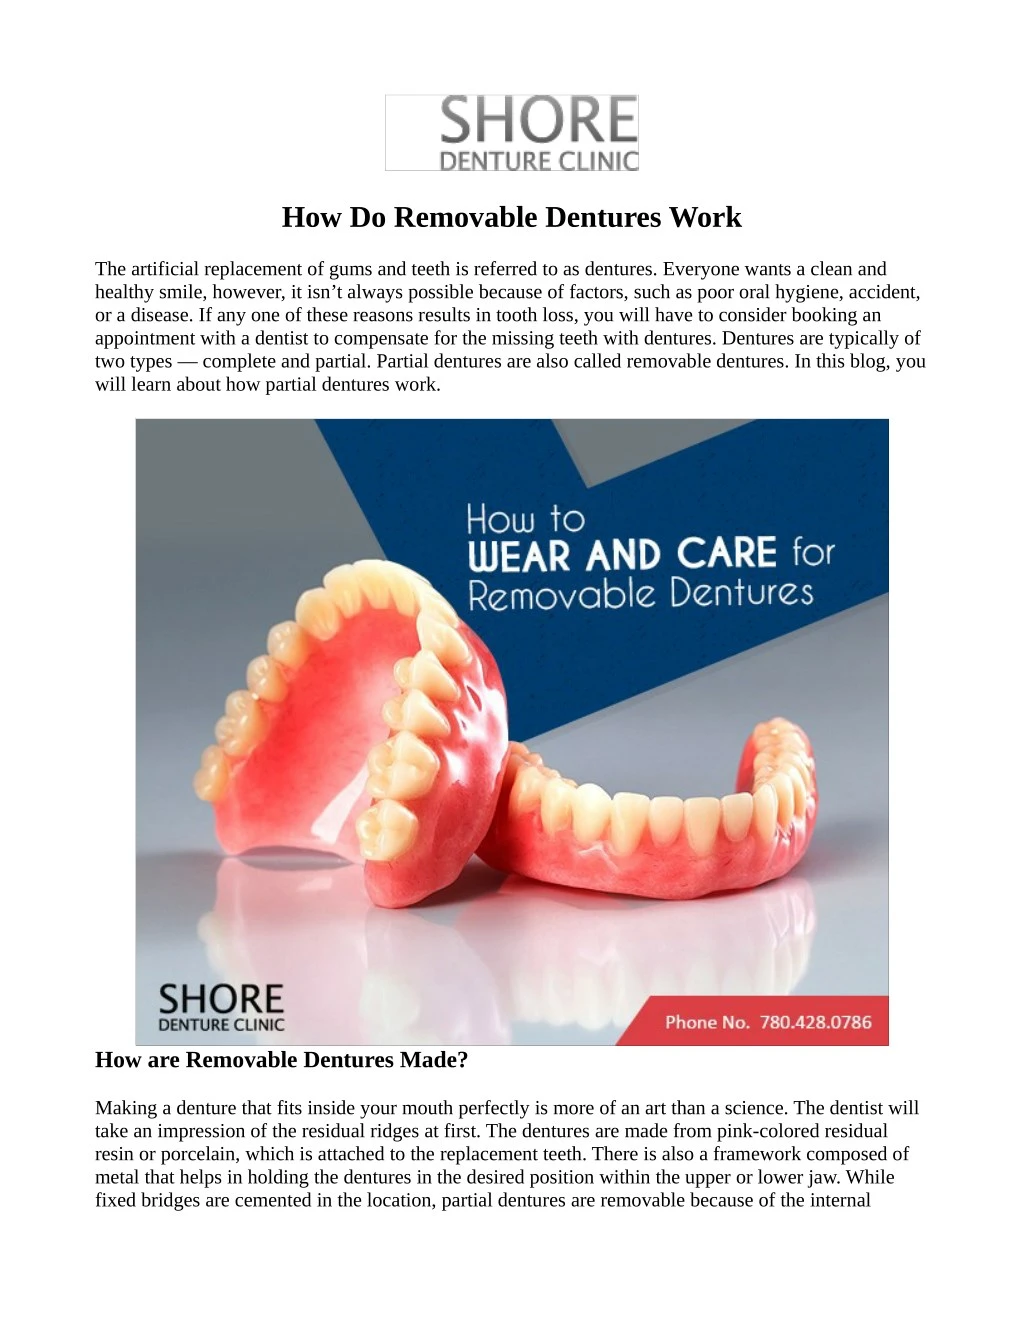 how do removable dentures work